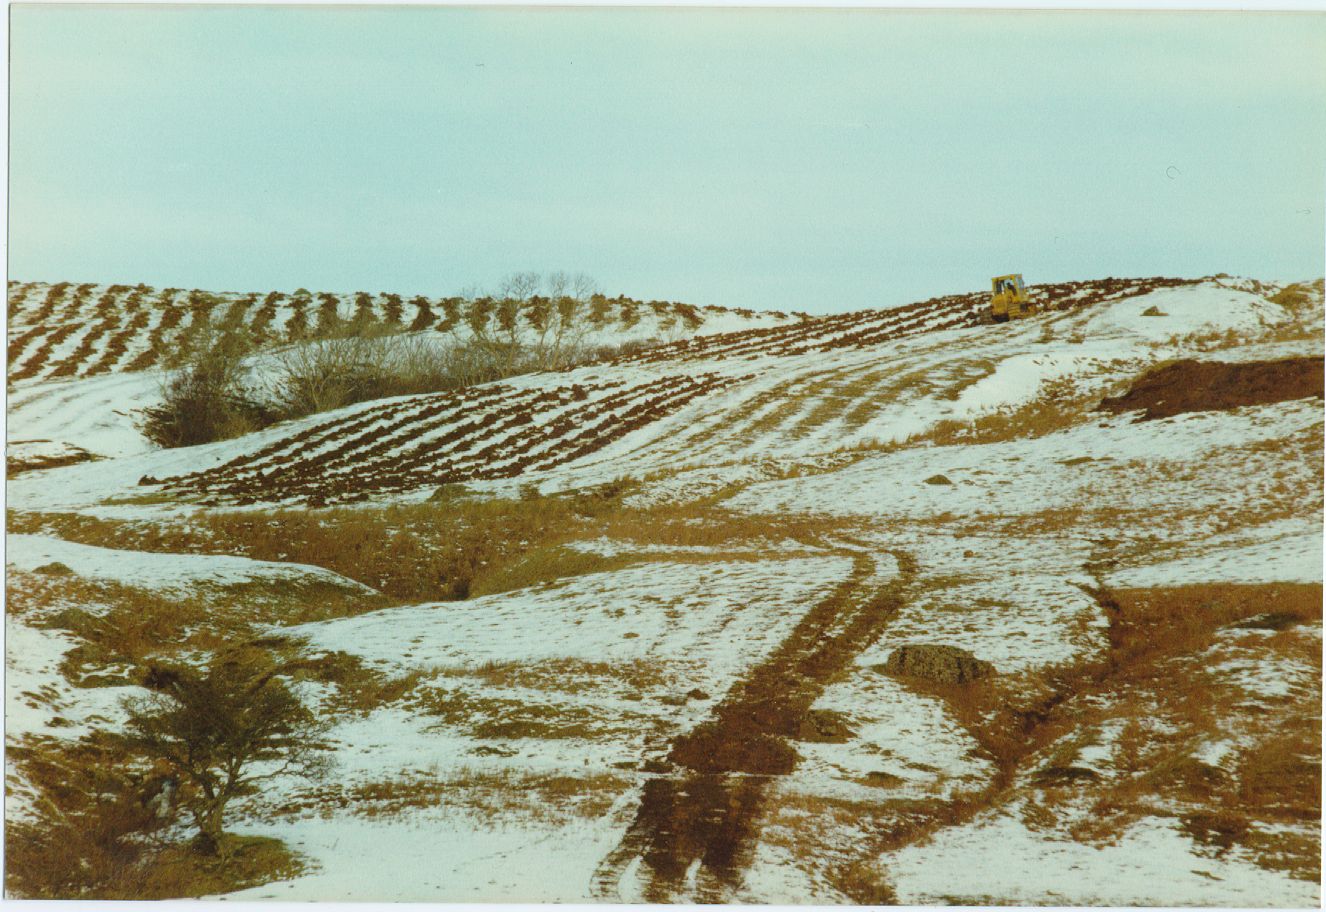 New rigs replace the old on Pinzarie Hill, as the forestry machine ploughs new furrows into the Mediaeval rigs in January 1987